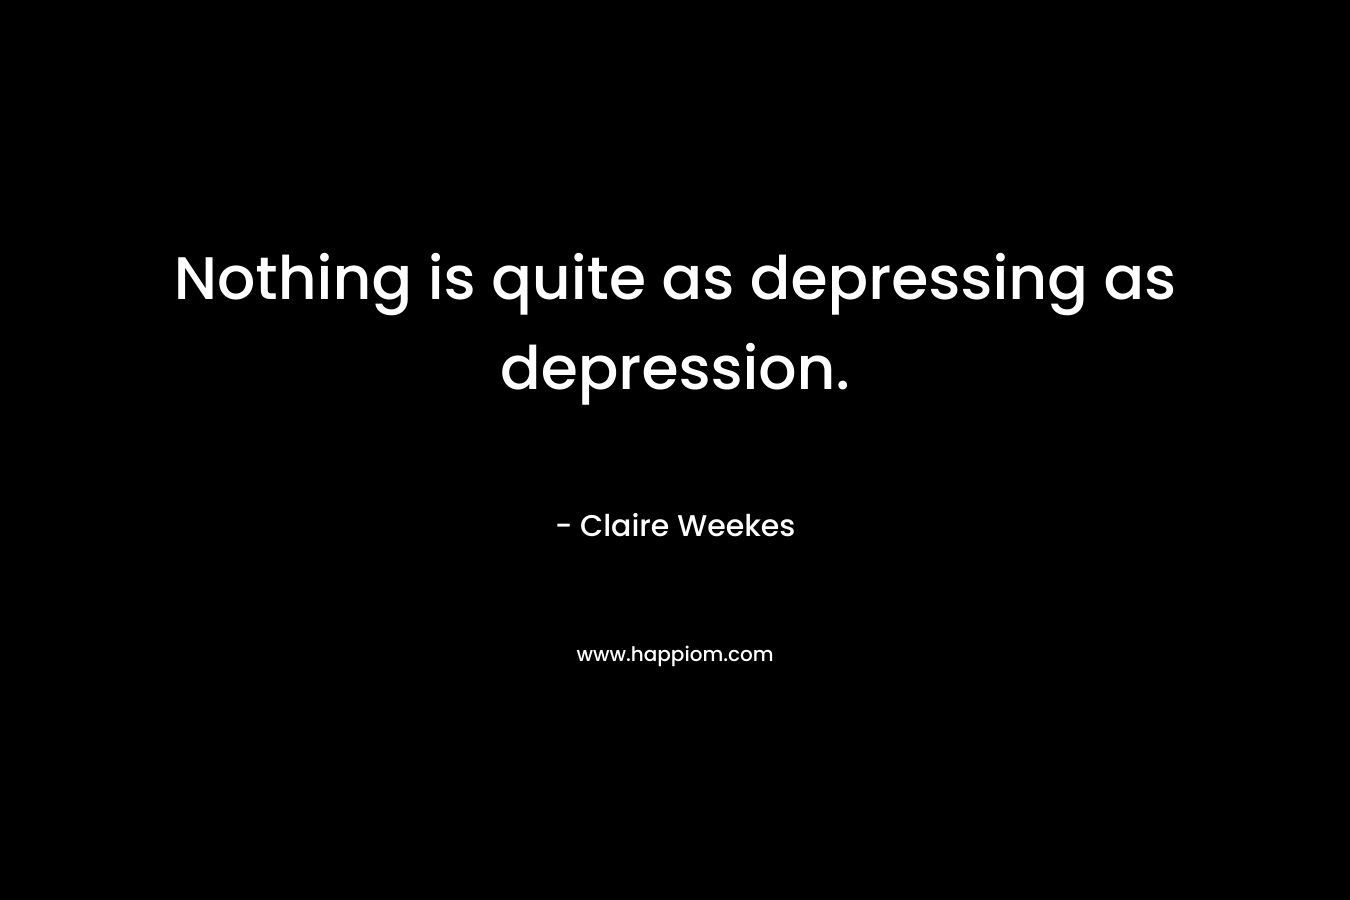 Nothing is quite as depressing as depression. – Claire Weekes